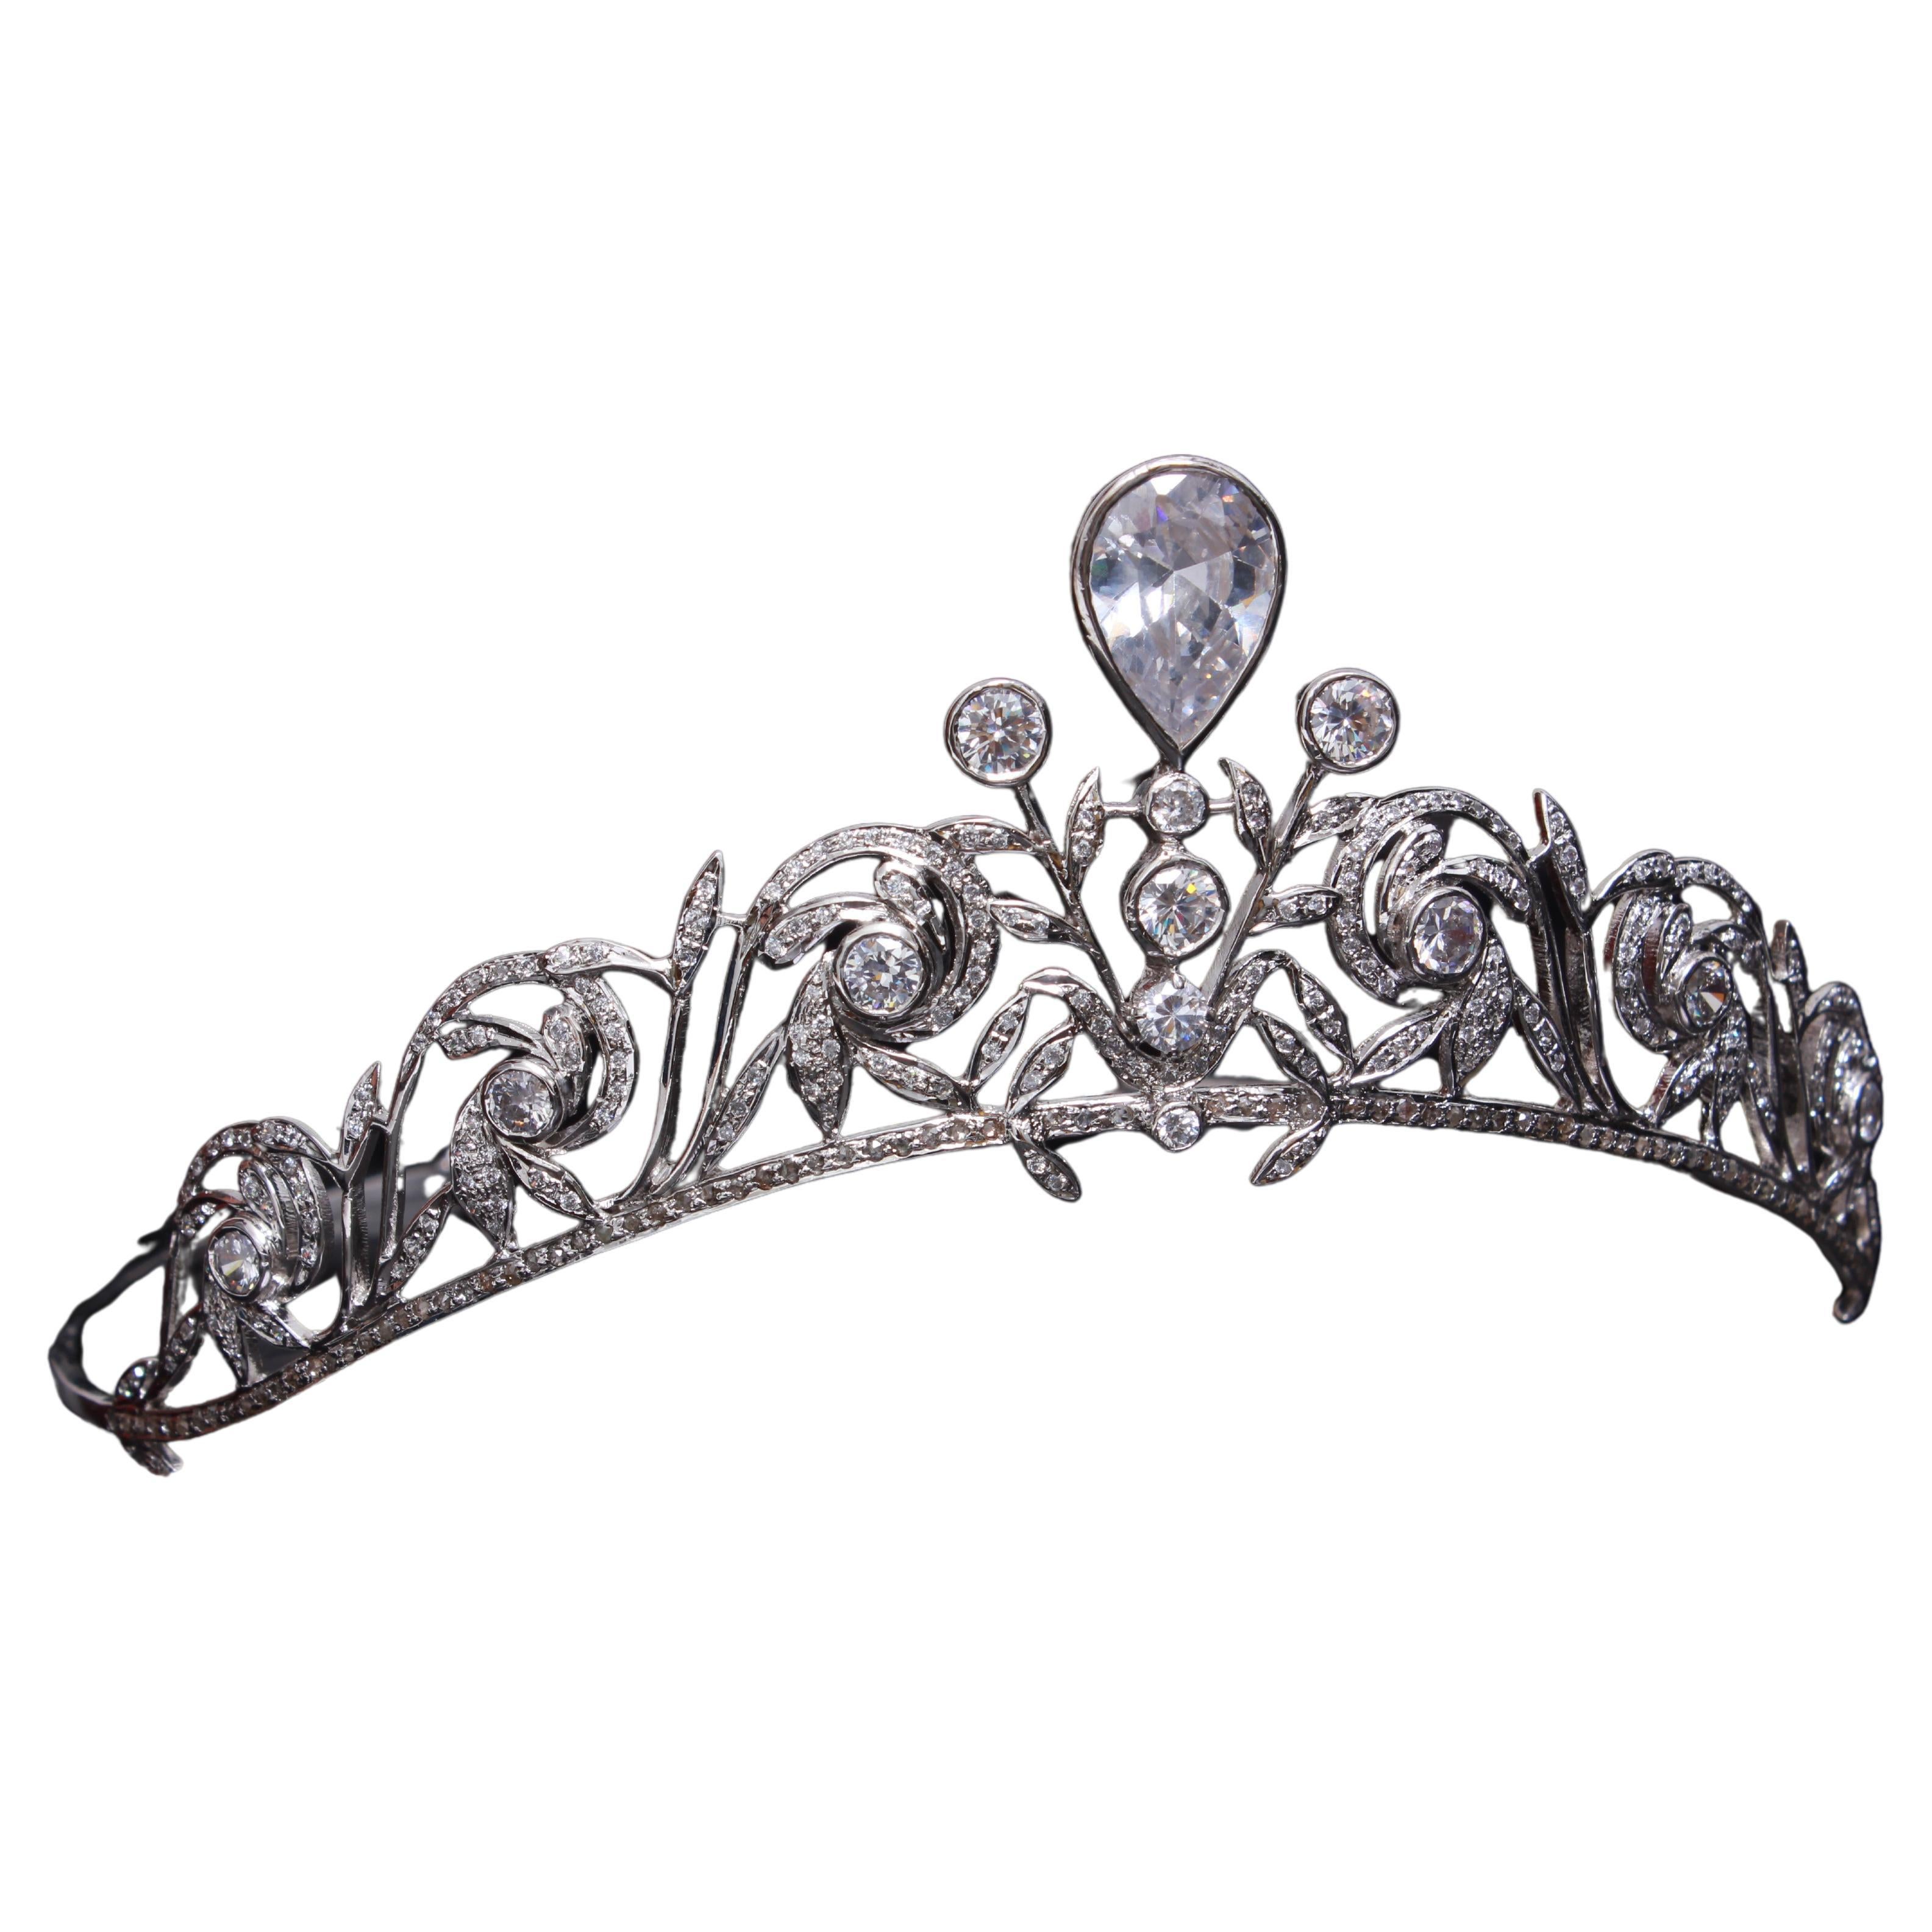 Elegant Natural pave diamonds topaz sterling silver tiara head accessory band For Sale